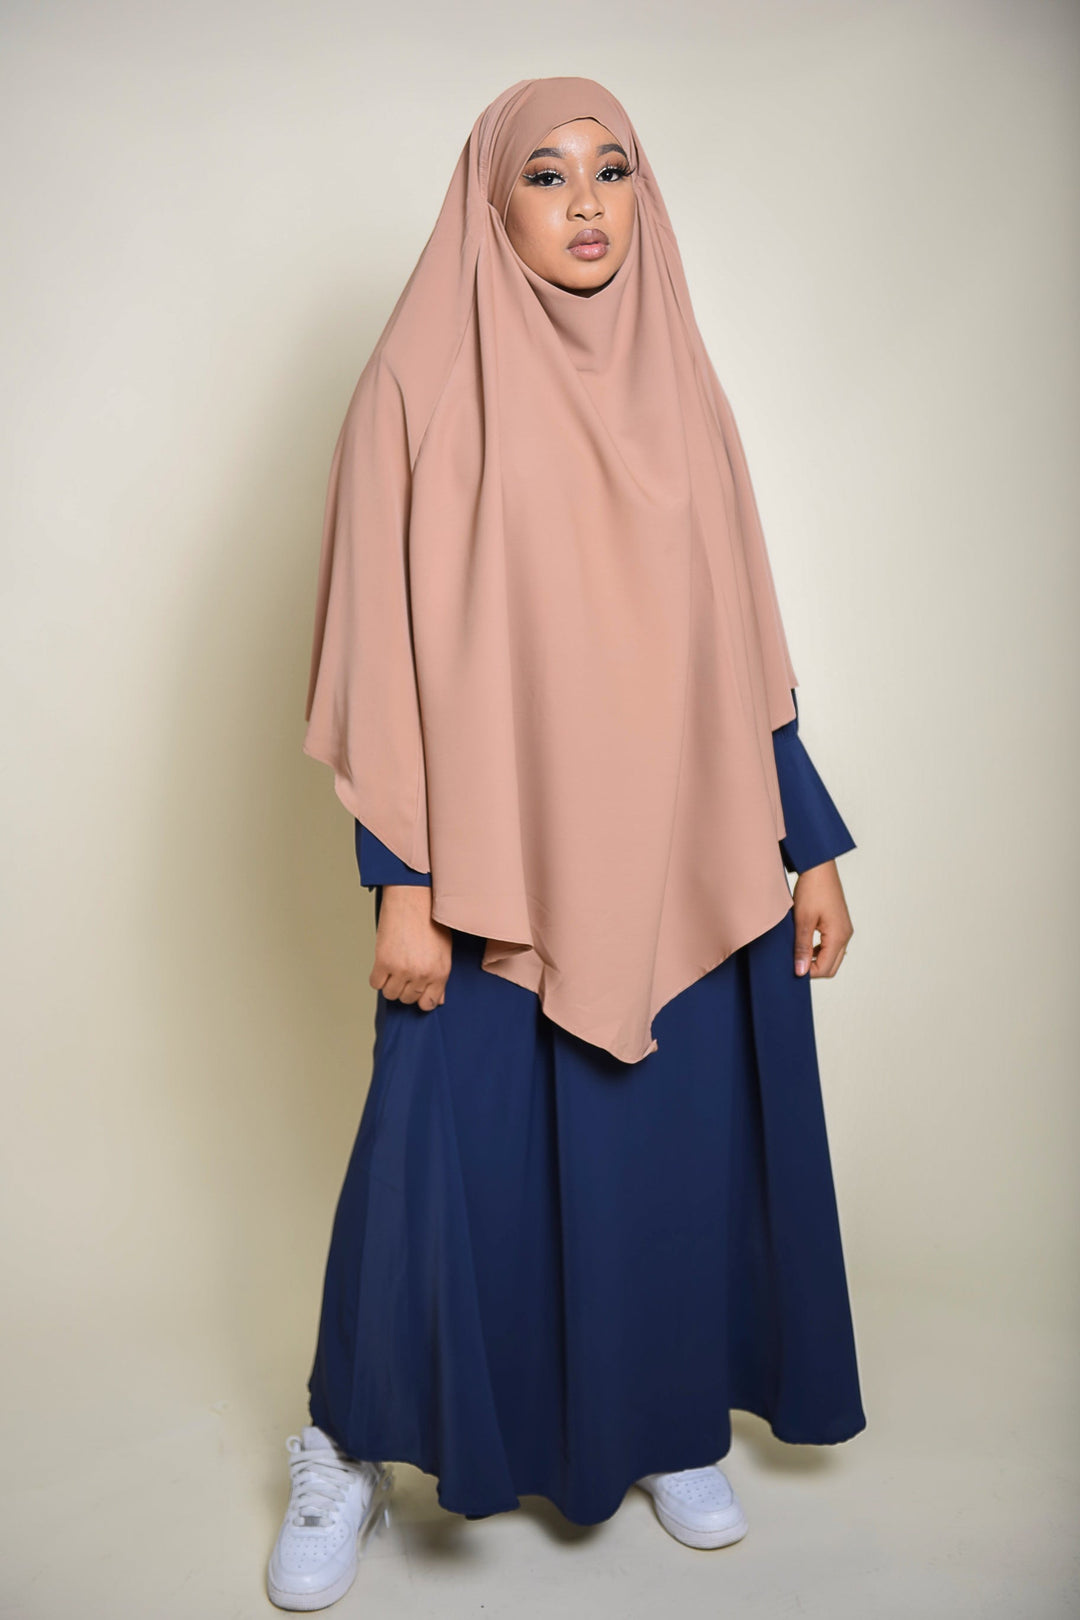 Get trendy with Diamond Khimar Beige - Hijab available at Voilee NY. Grab yours for $34.99 today!